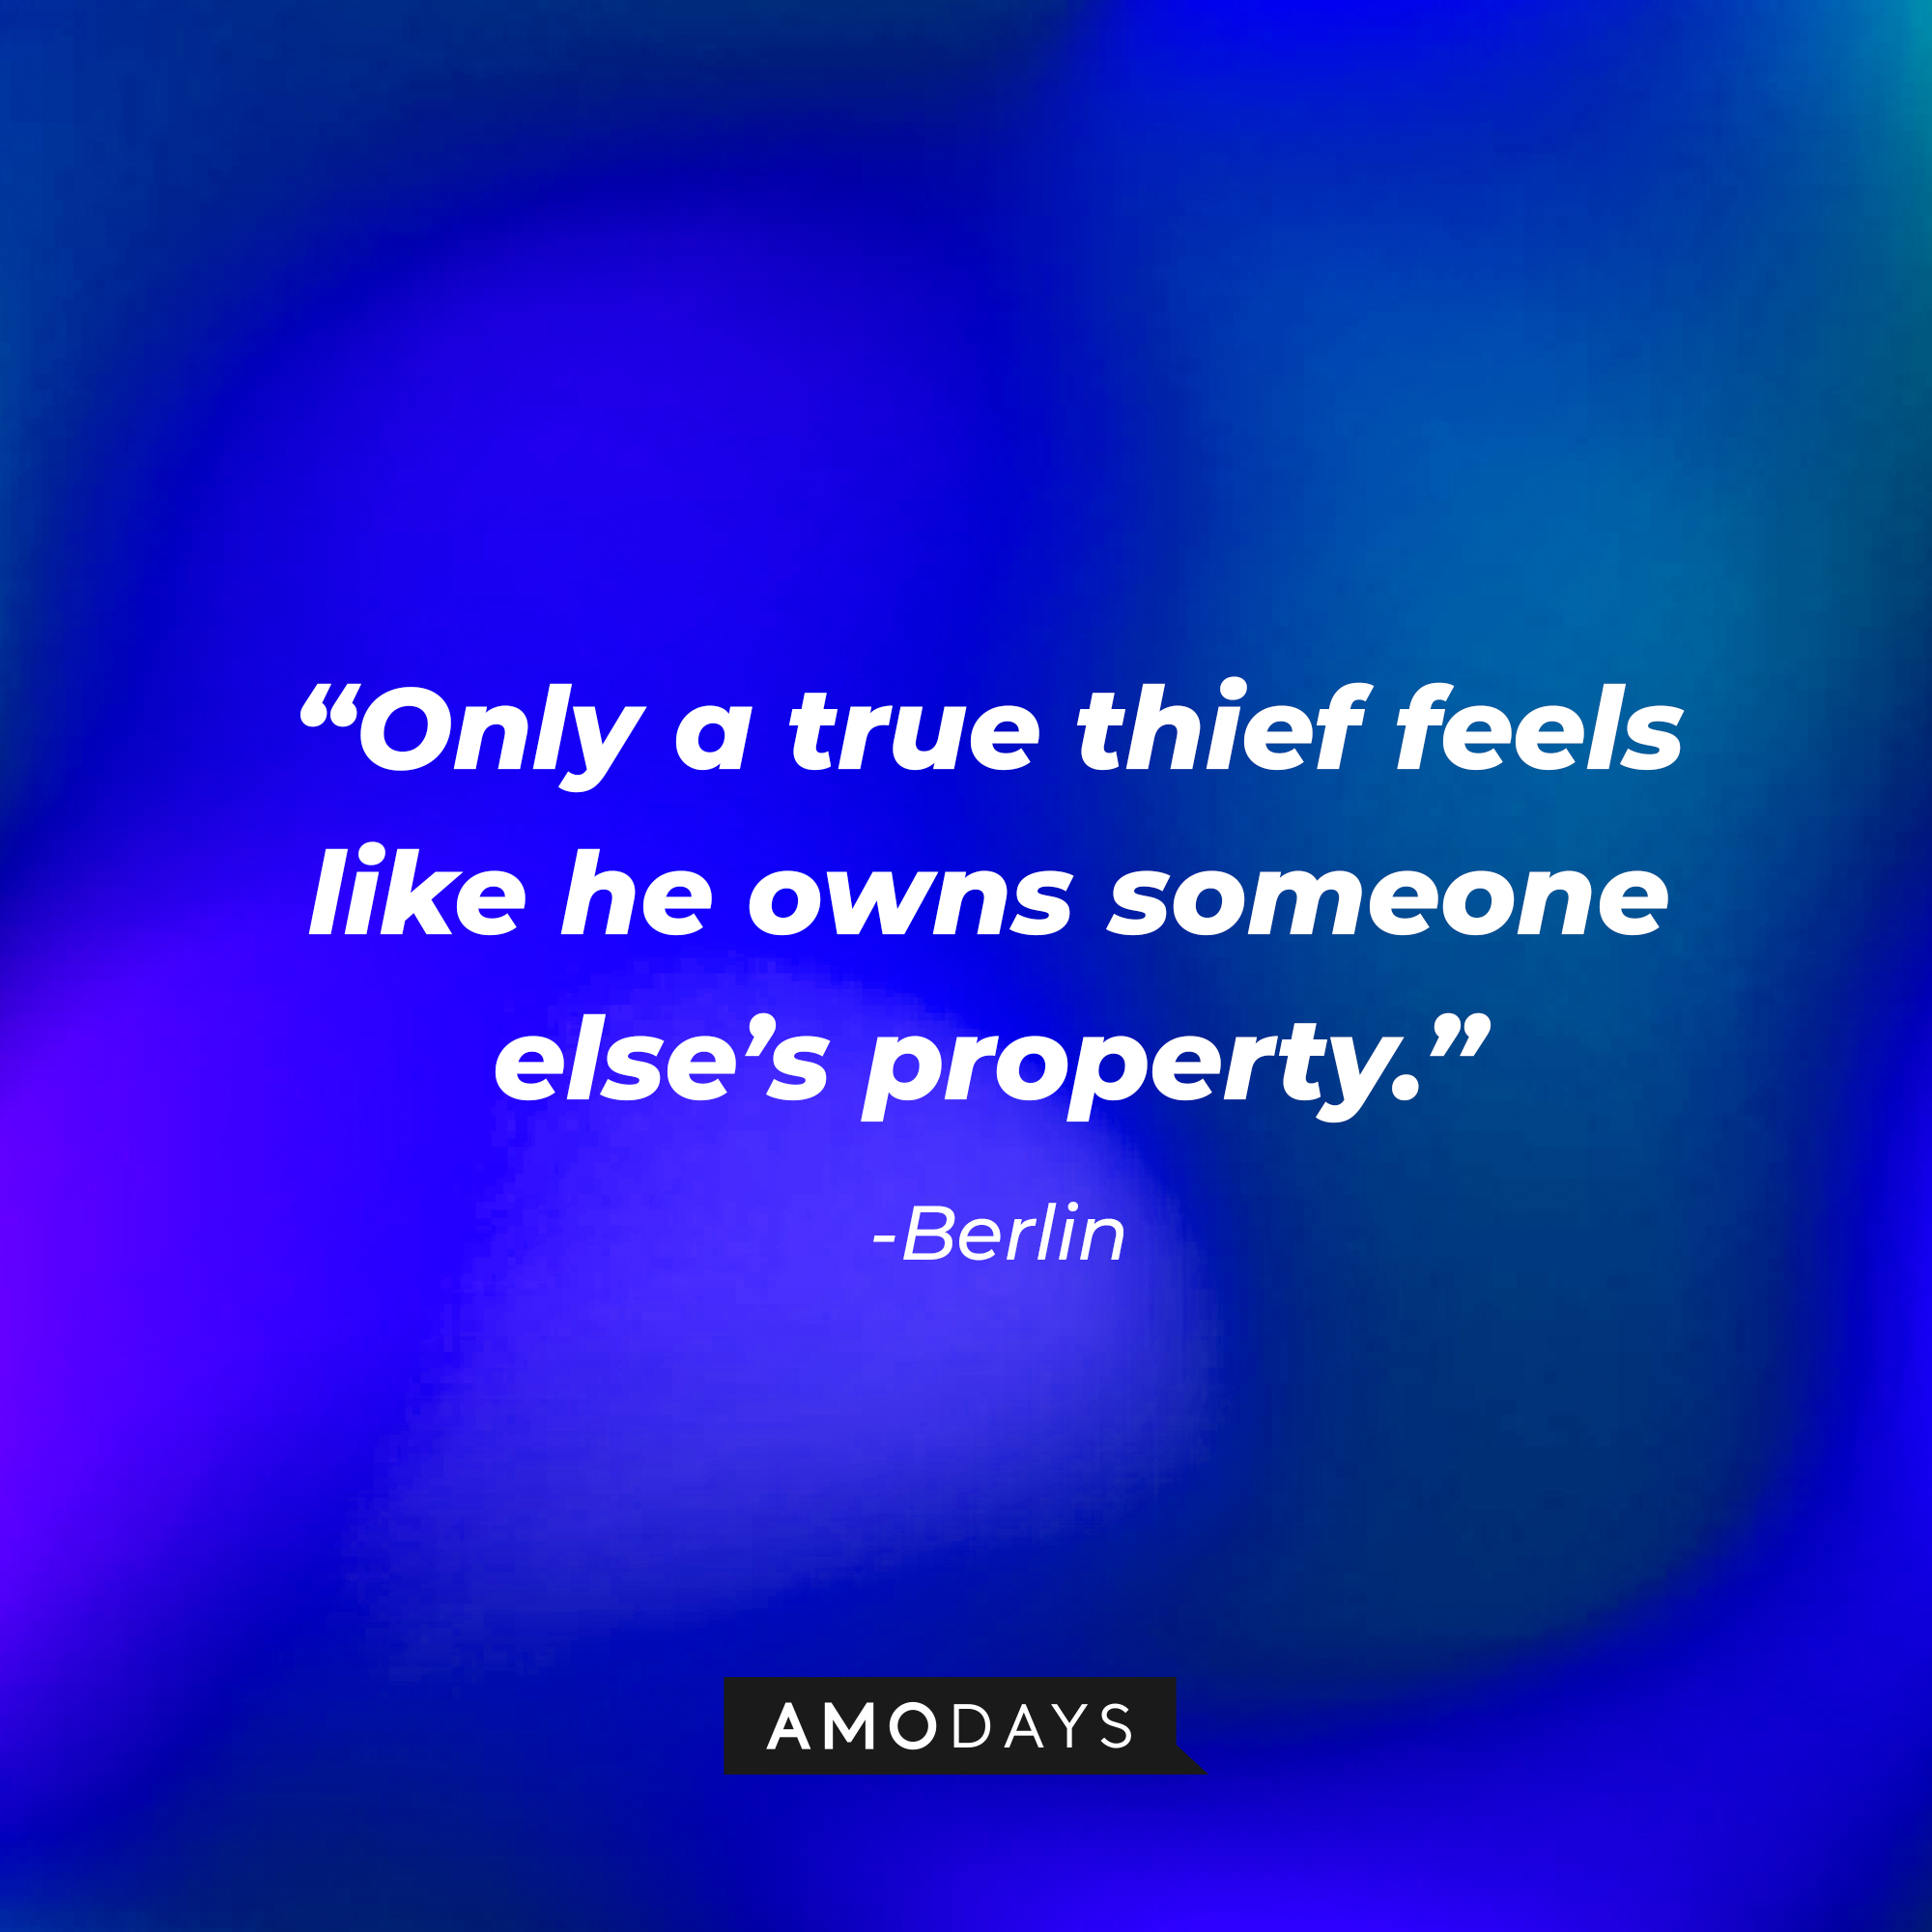 Berlin’s quote: “Only a true thief feels like he owns someone else’s property.” | Source: AmoDays